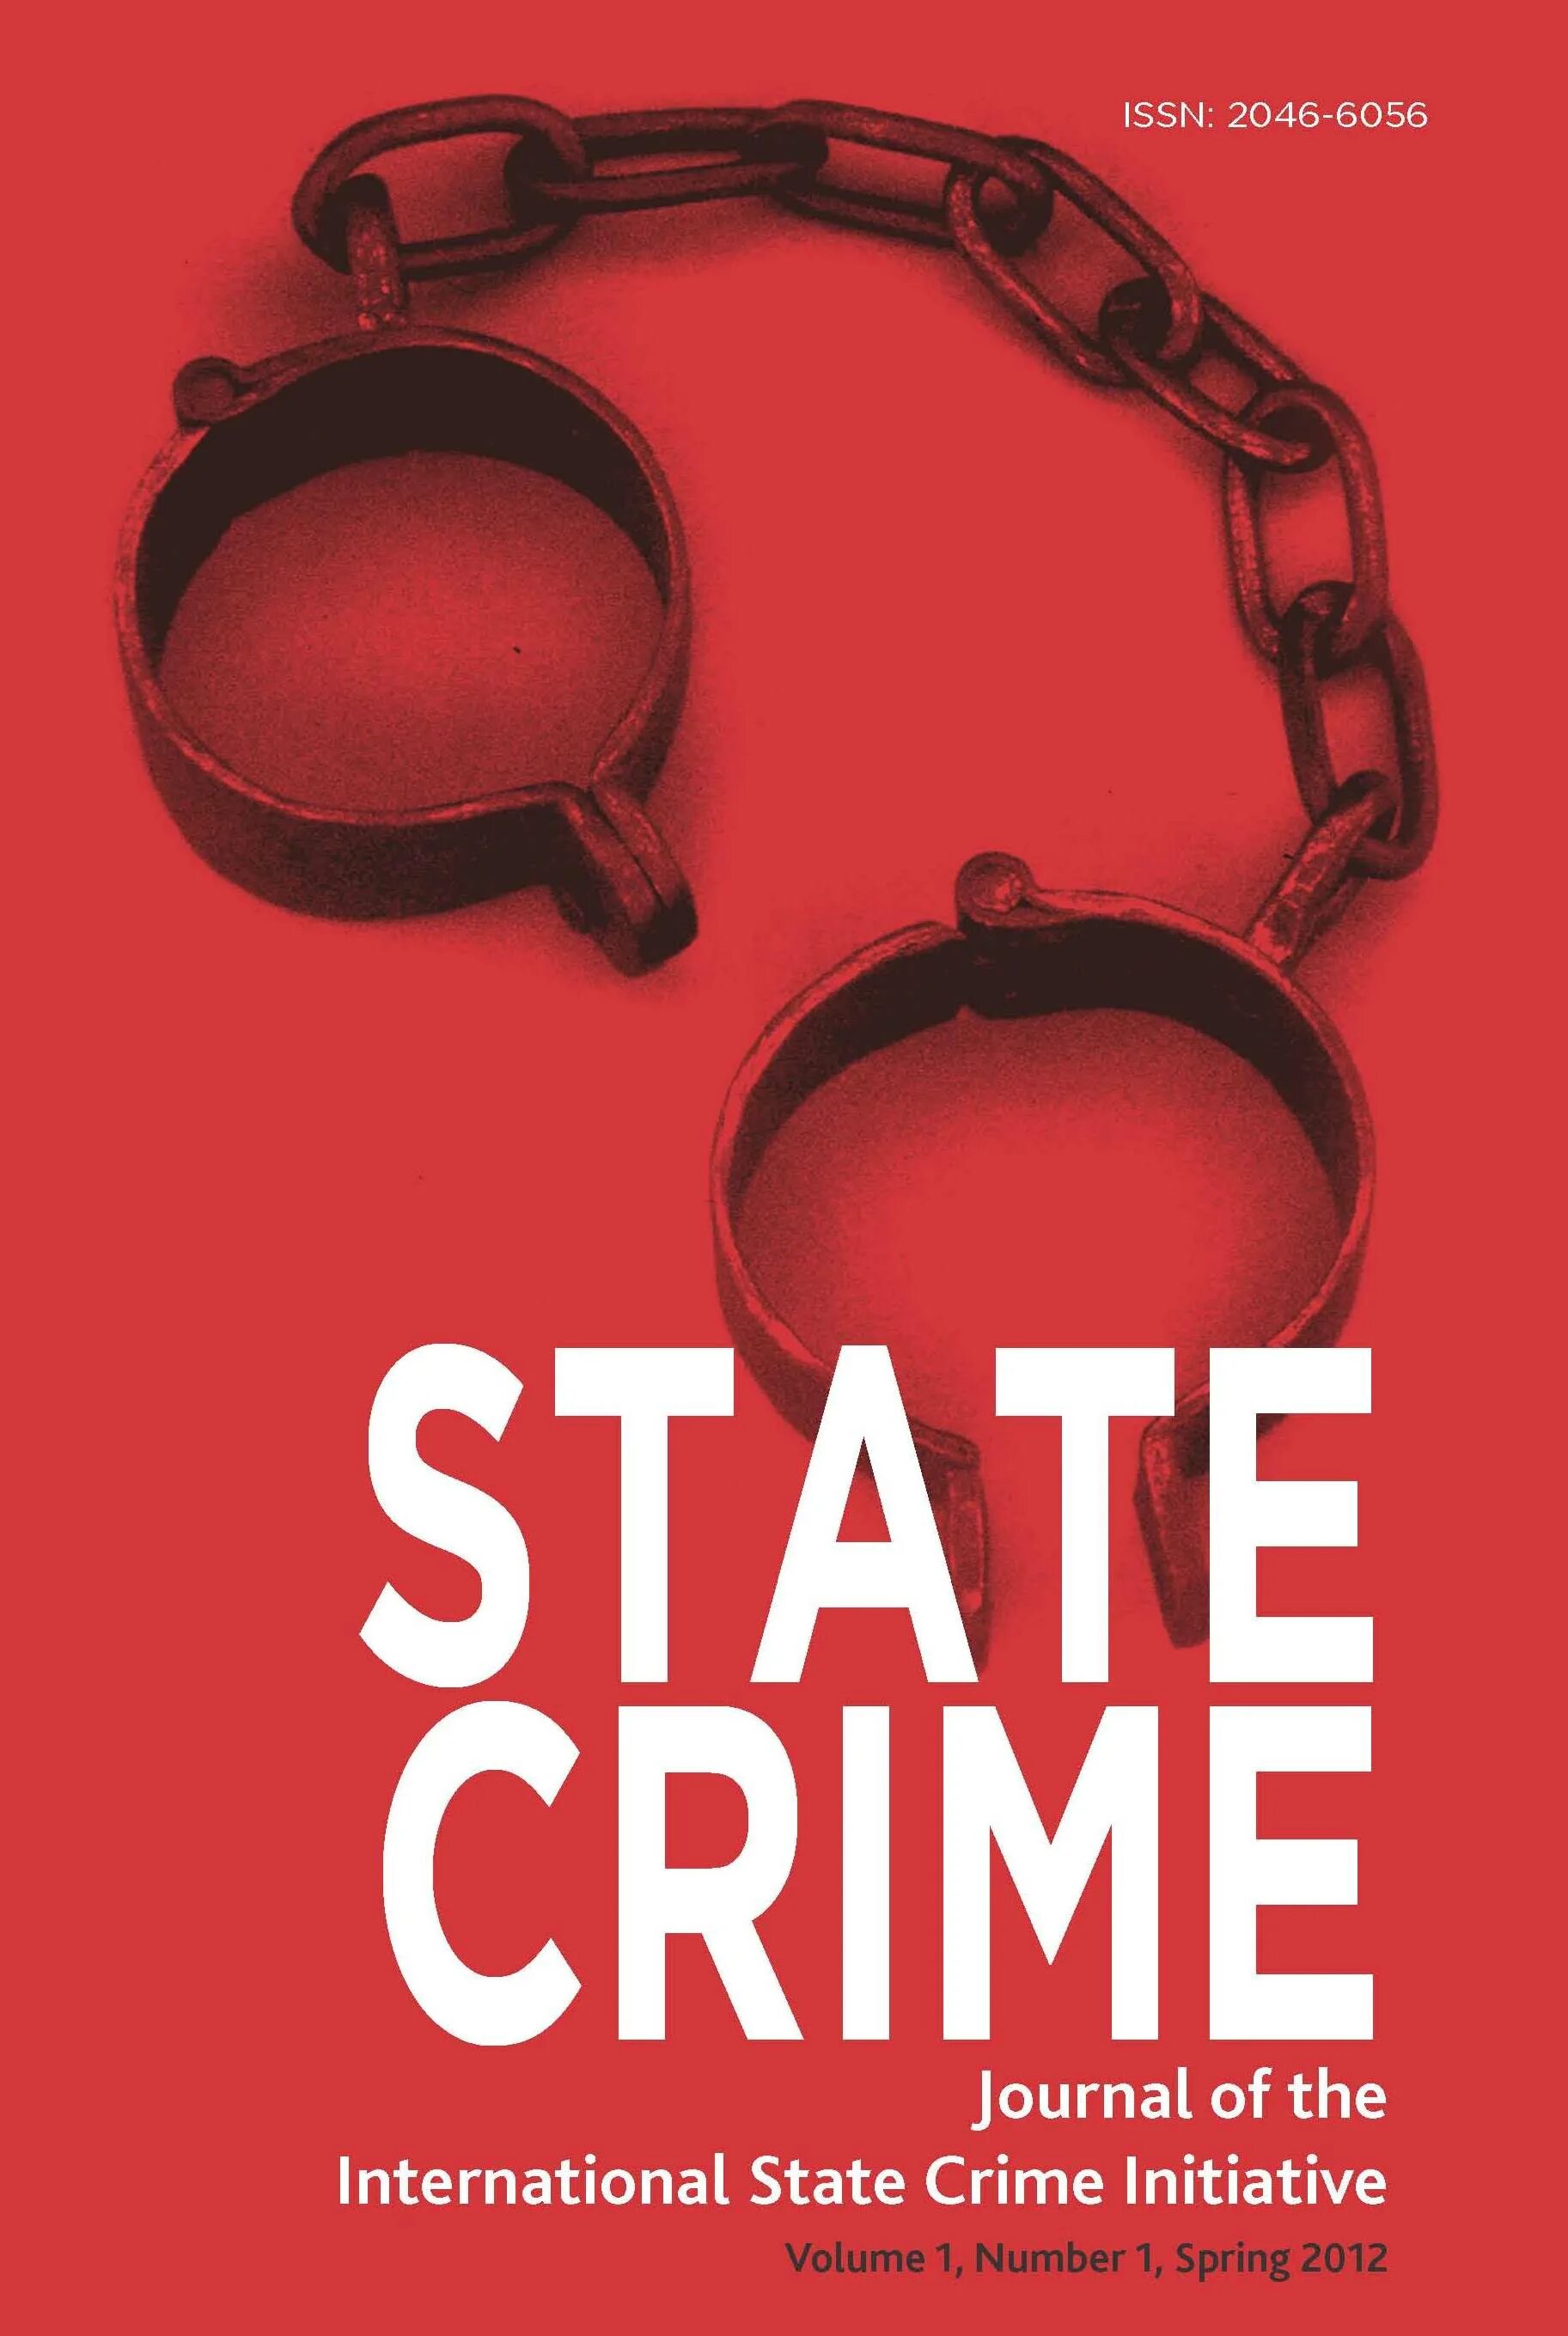 State Crime. About Crime. International Criminal Law. What is Crime.